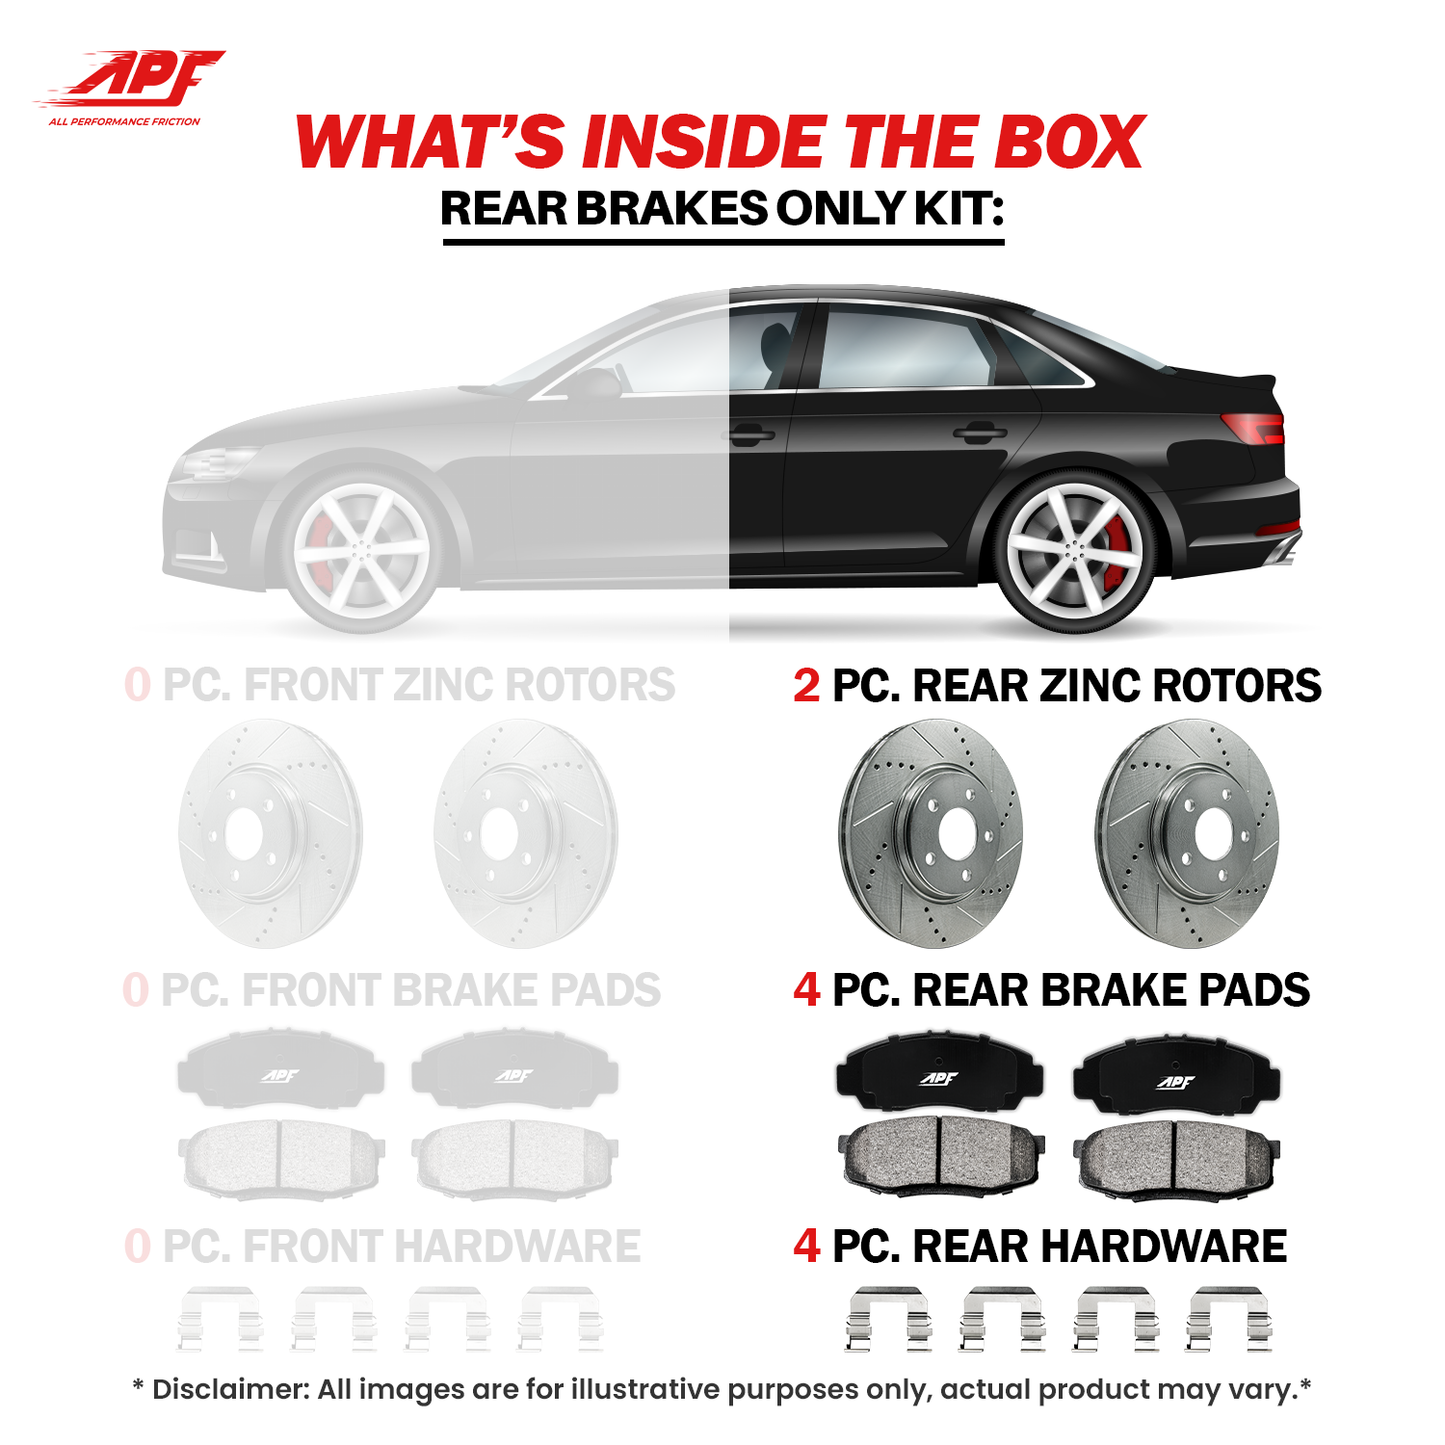 APF All Performance Friction Rear Rotors and Pads Half Kit compatible with Volkswagen Passat 2012-2015 Zinc Drilled Slotted Rotors with Ceramic Carbon Fiber Brake Pads | $180.86